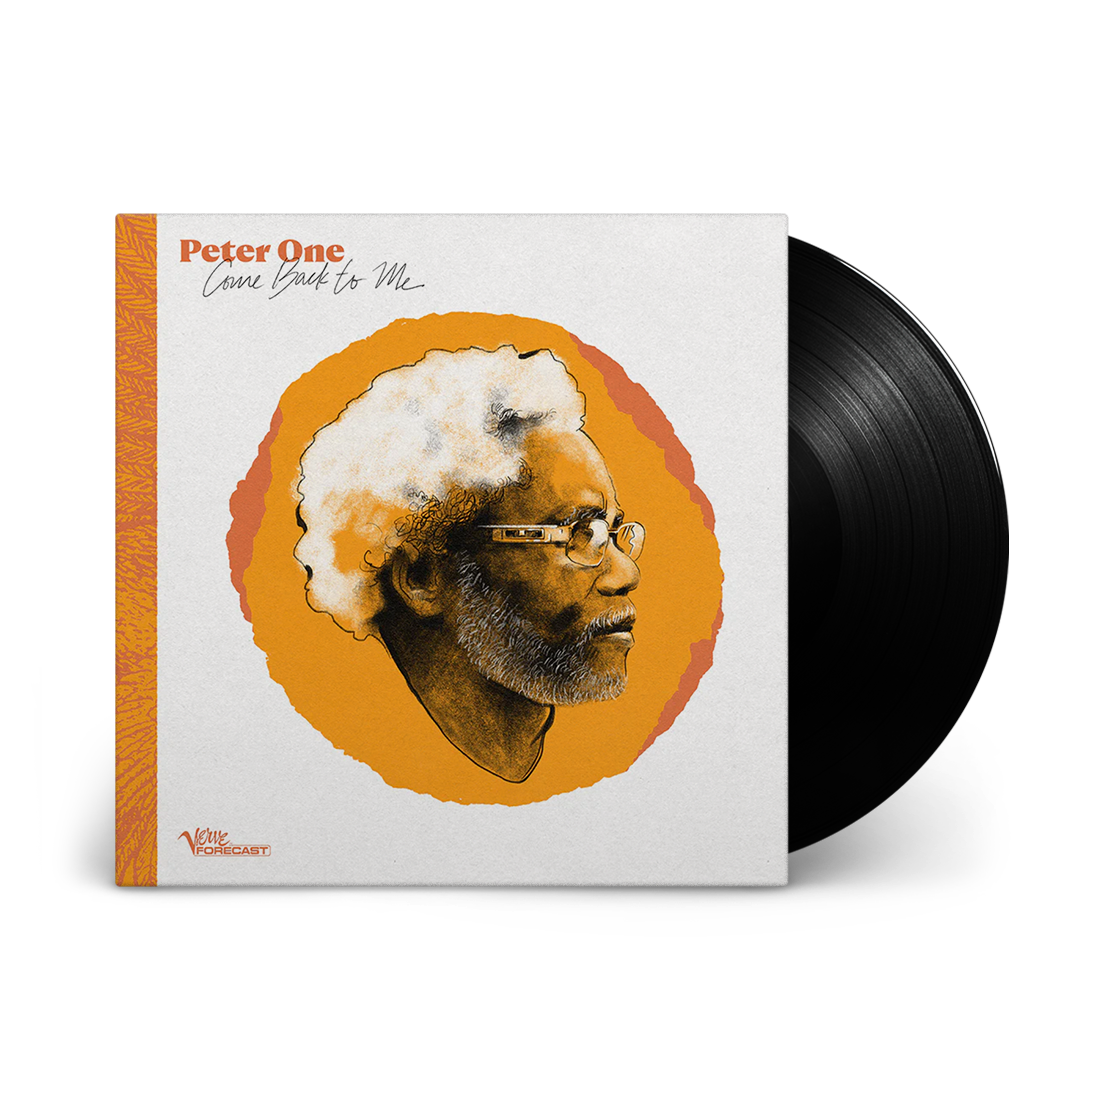 Peter One - Come Back To Me: Vinyl LP